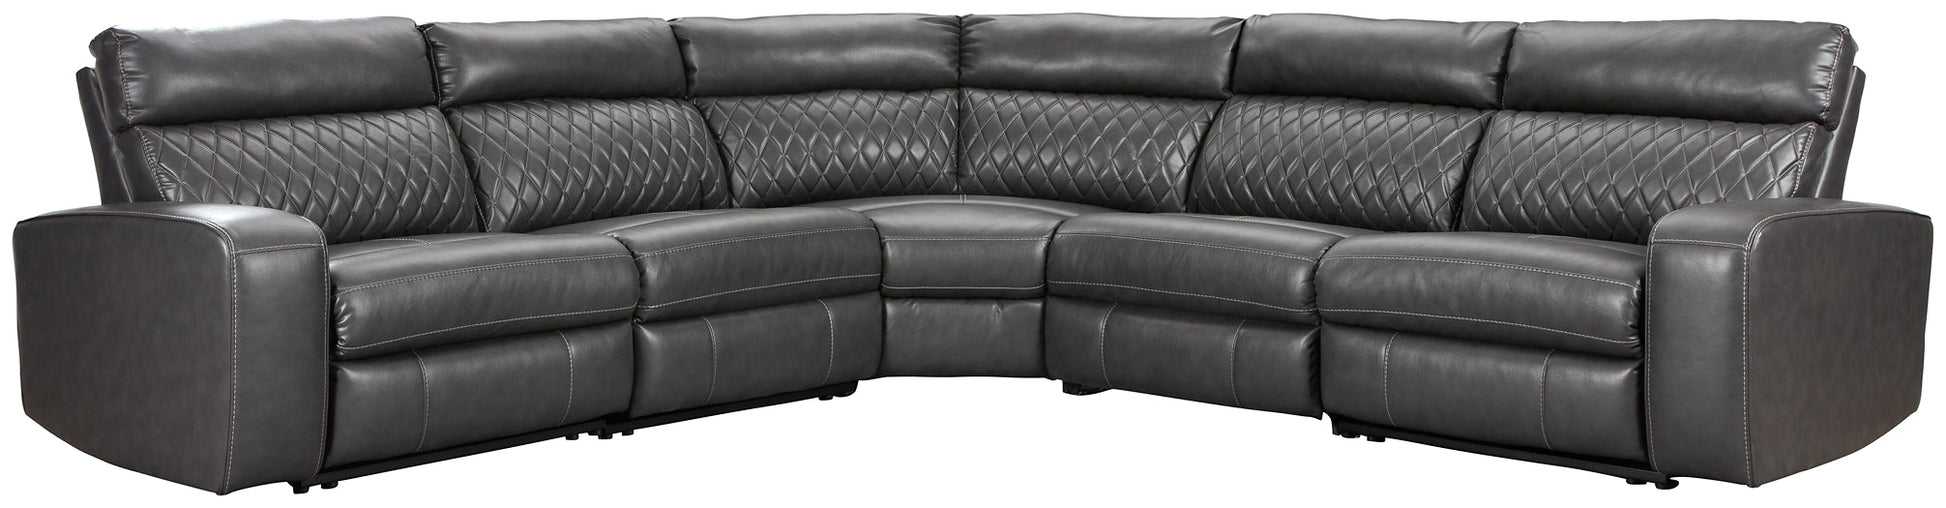 Samperstone 5-Piece Power Reclining Sectional at Cloud 9 Mattress & Furniture furniture, home furnishing, home decor